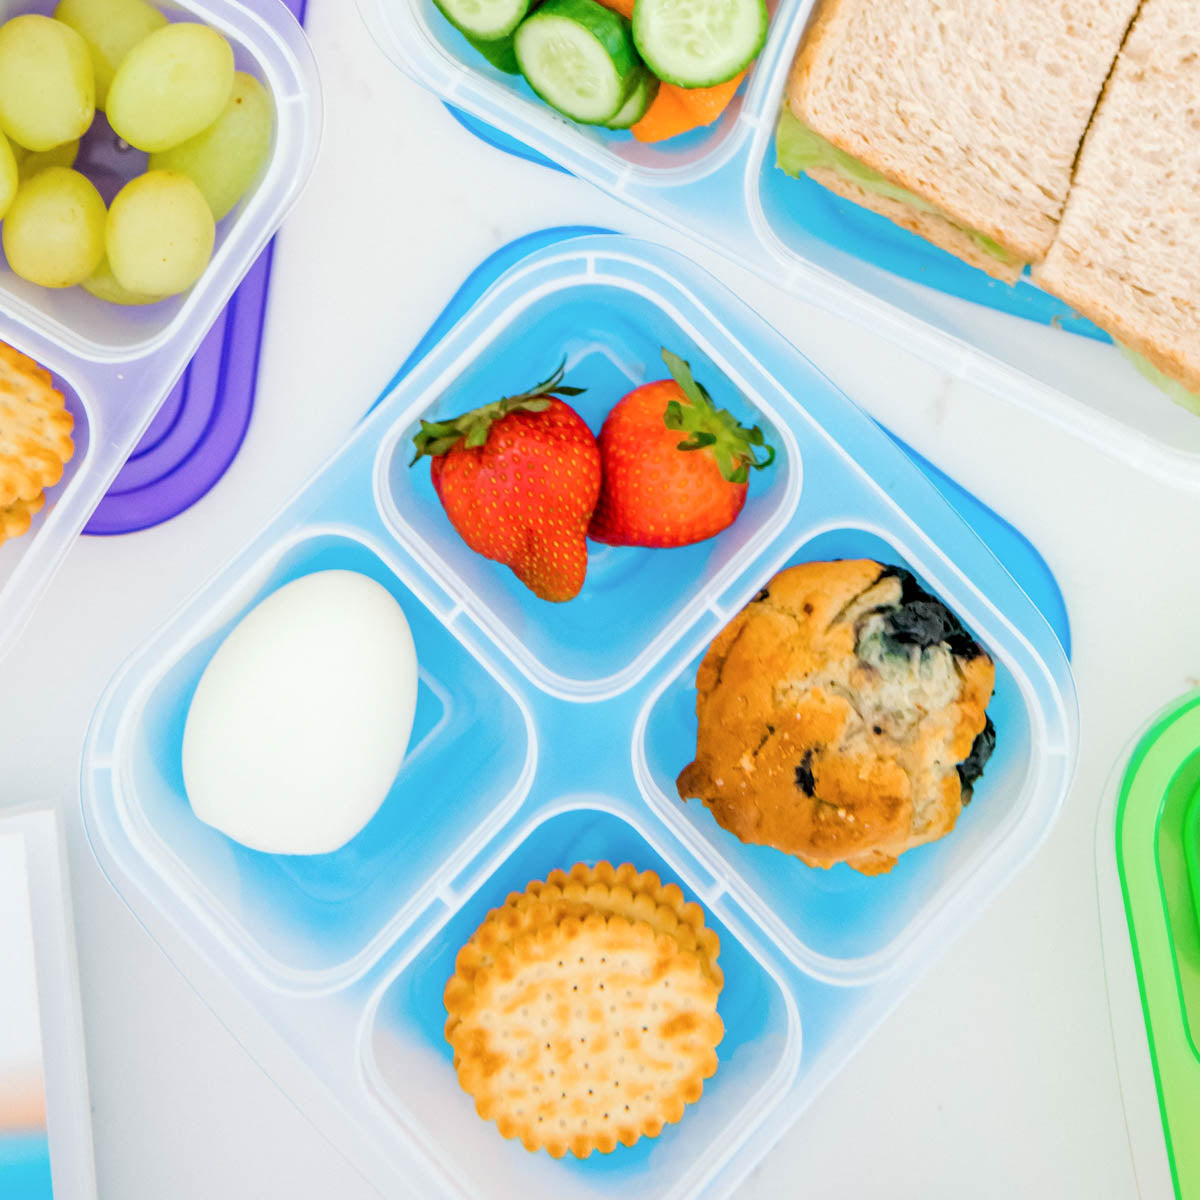 How to choose a school lunchbox - The Organised Housewife